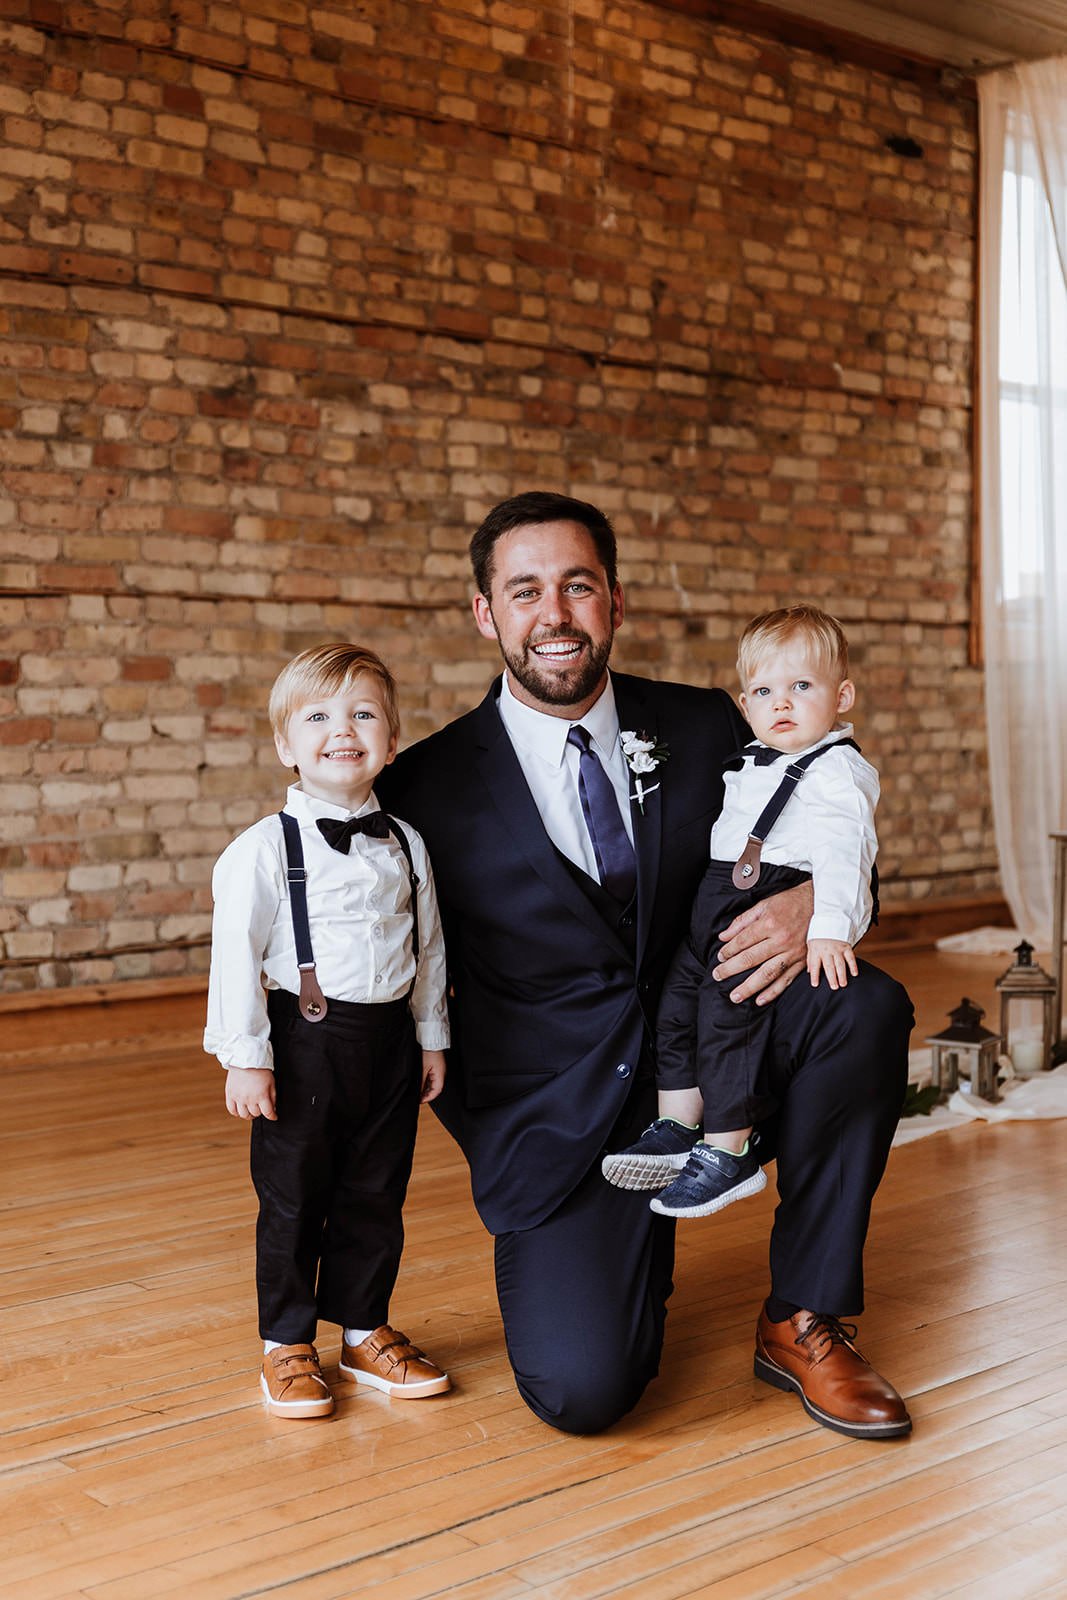 What to dress your ring bearers in for a wedding